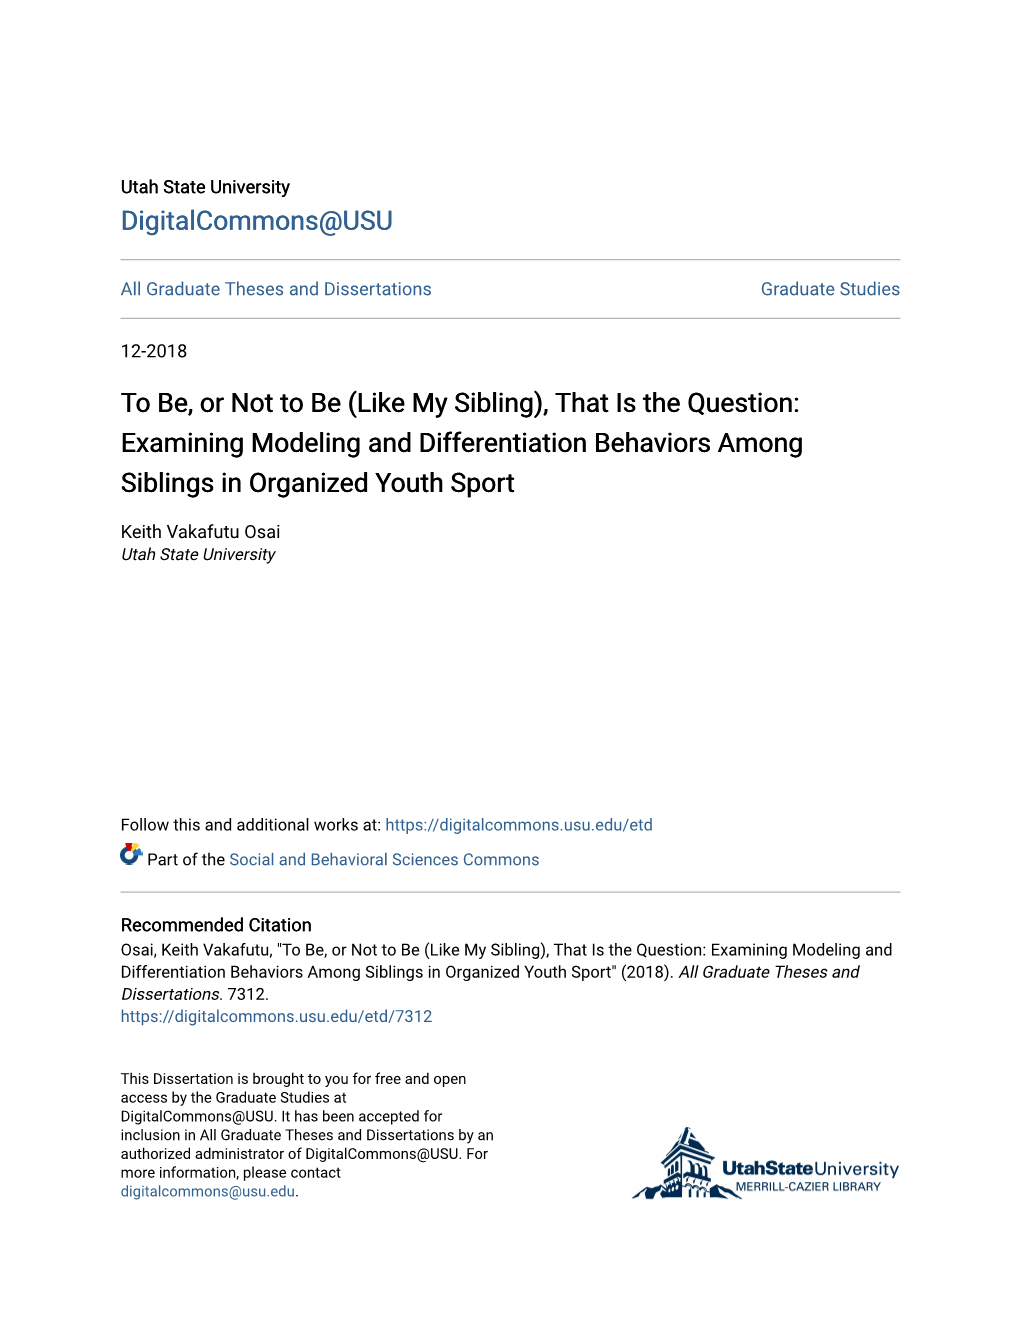 To Be, Or Not to Be (Like My Sibling), That Is the Question: Examining Modeling and Differentiation Behaviors Among Siblings in Organized Youth Sport